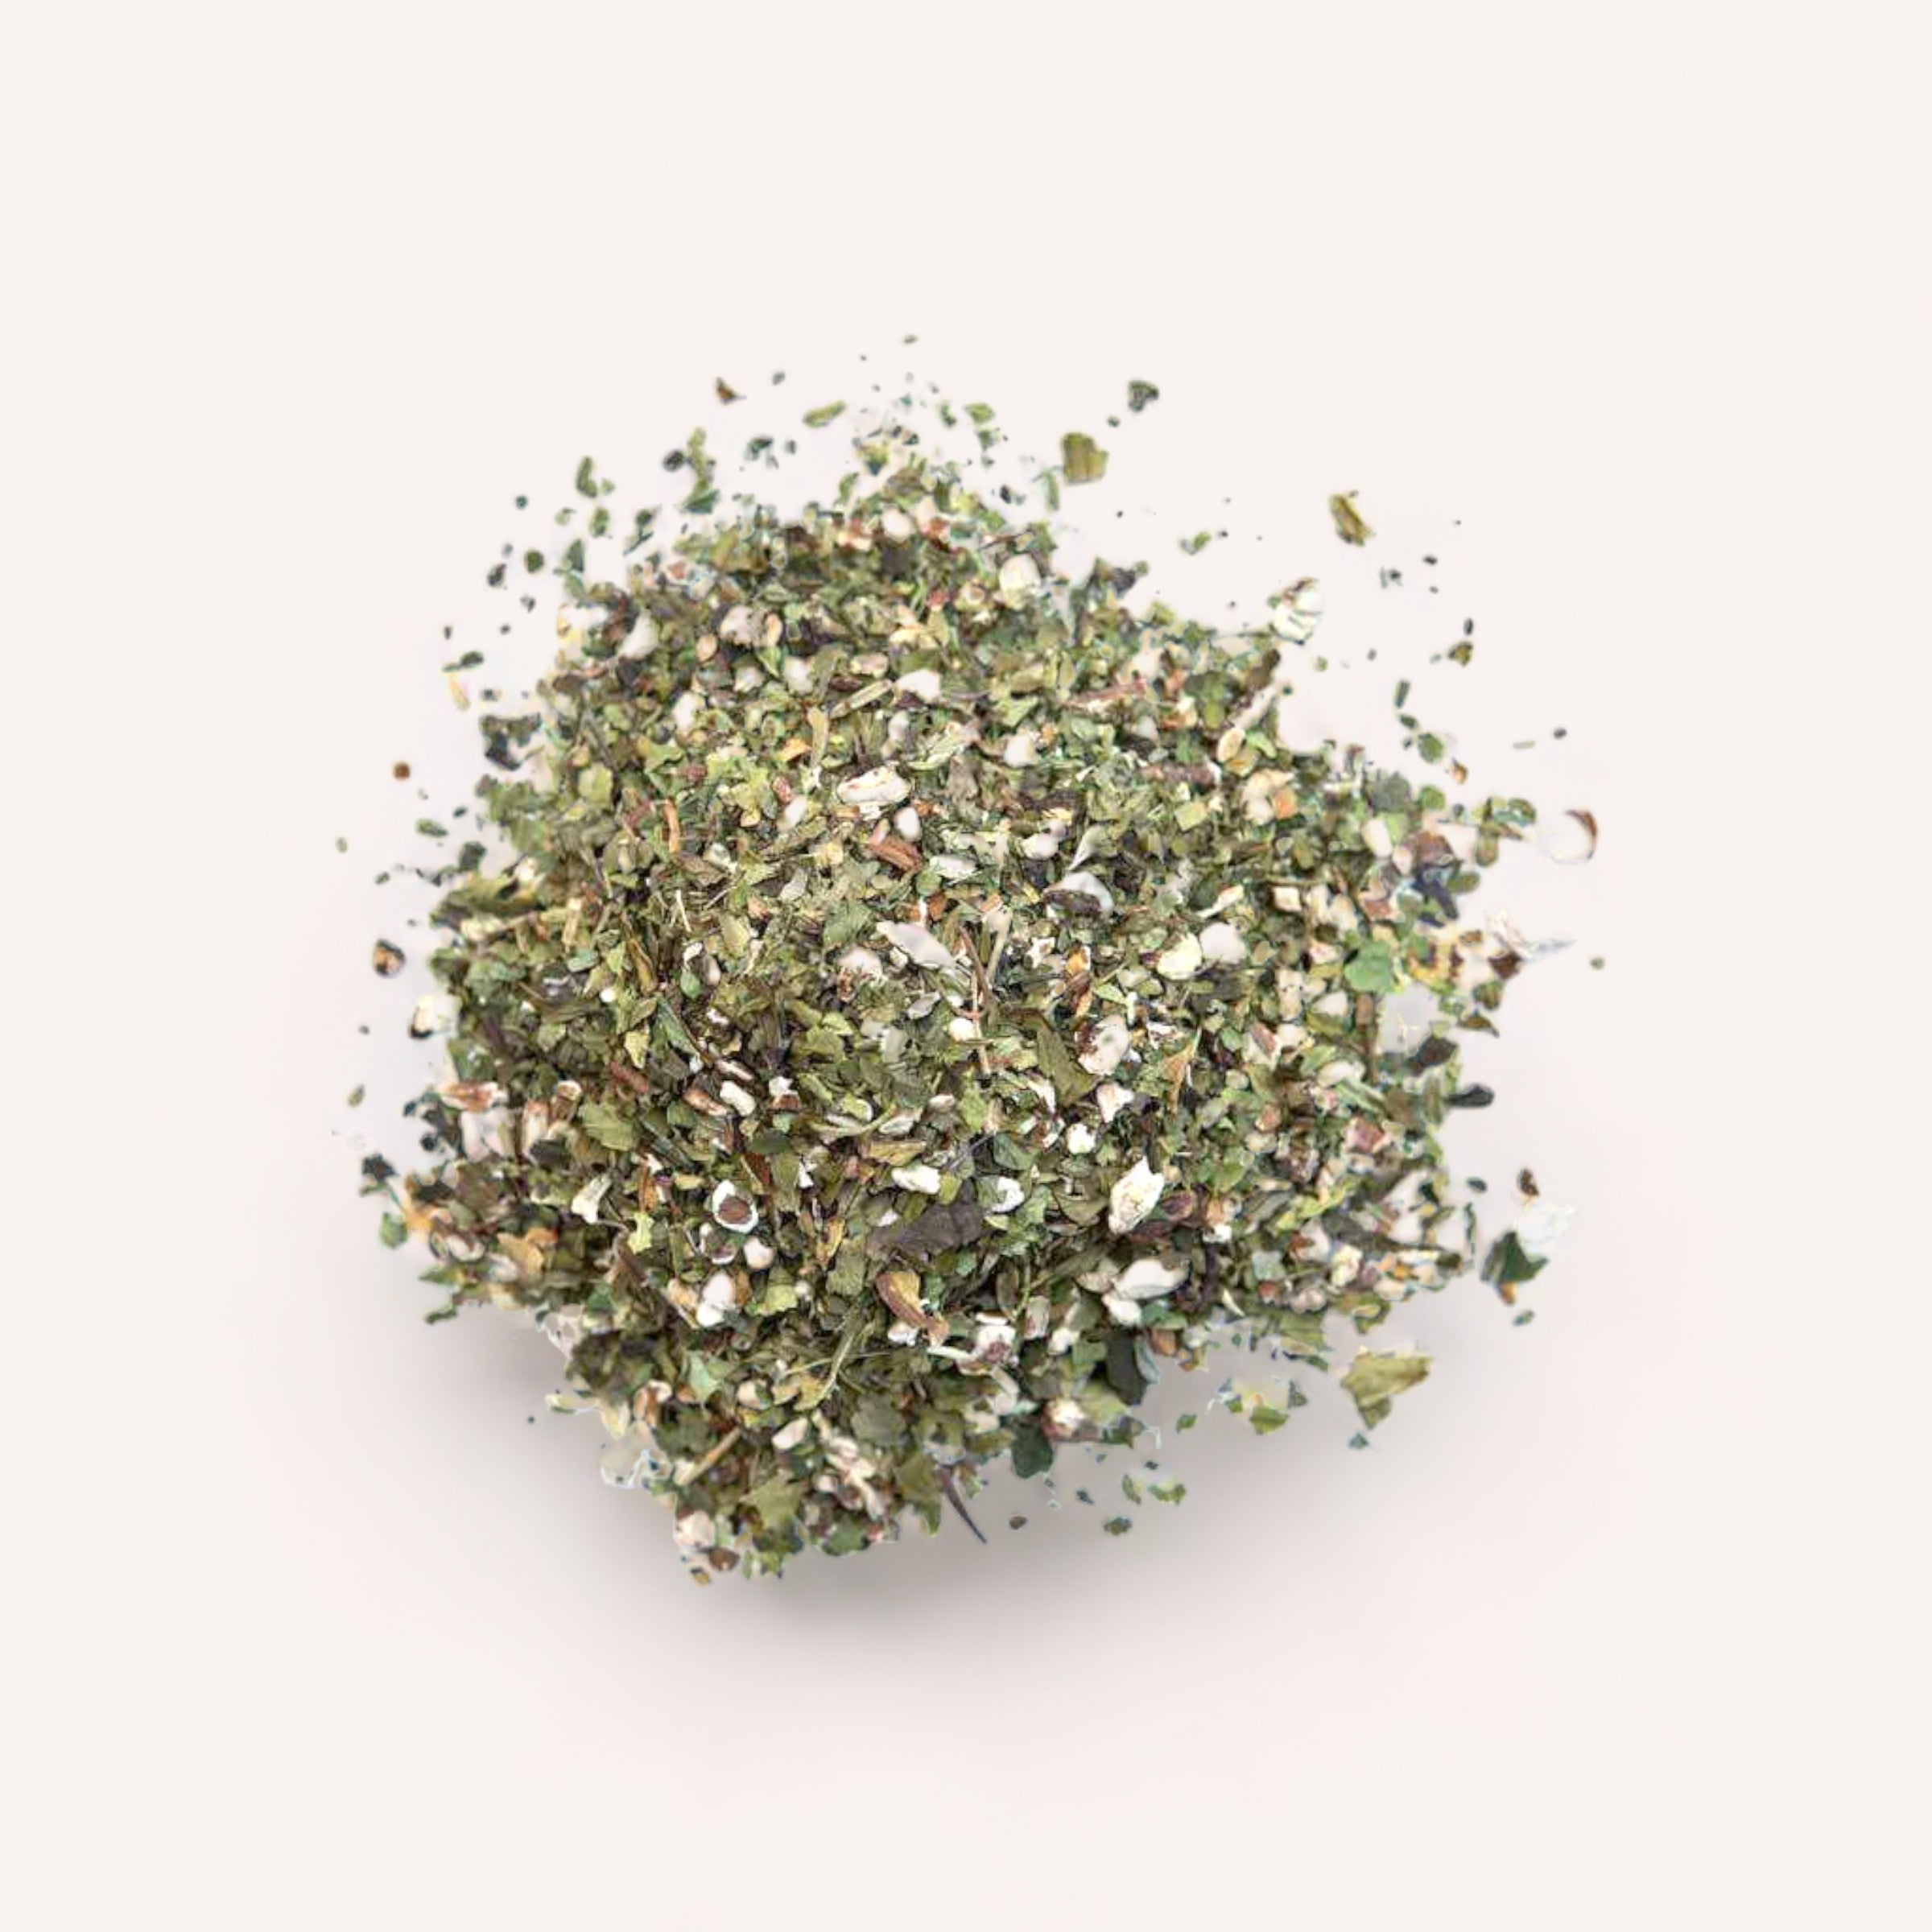 A pile of mixed, nutrient-dense Salvation Tea herbs and spices by Forage + Bloom on a white background.